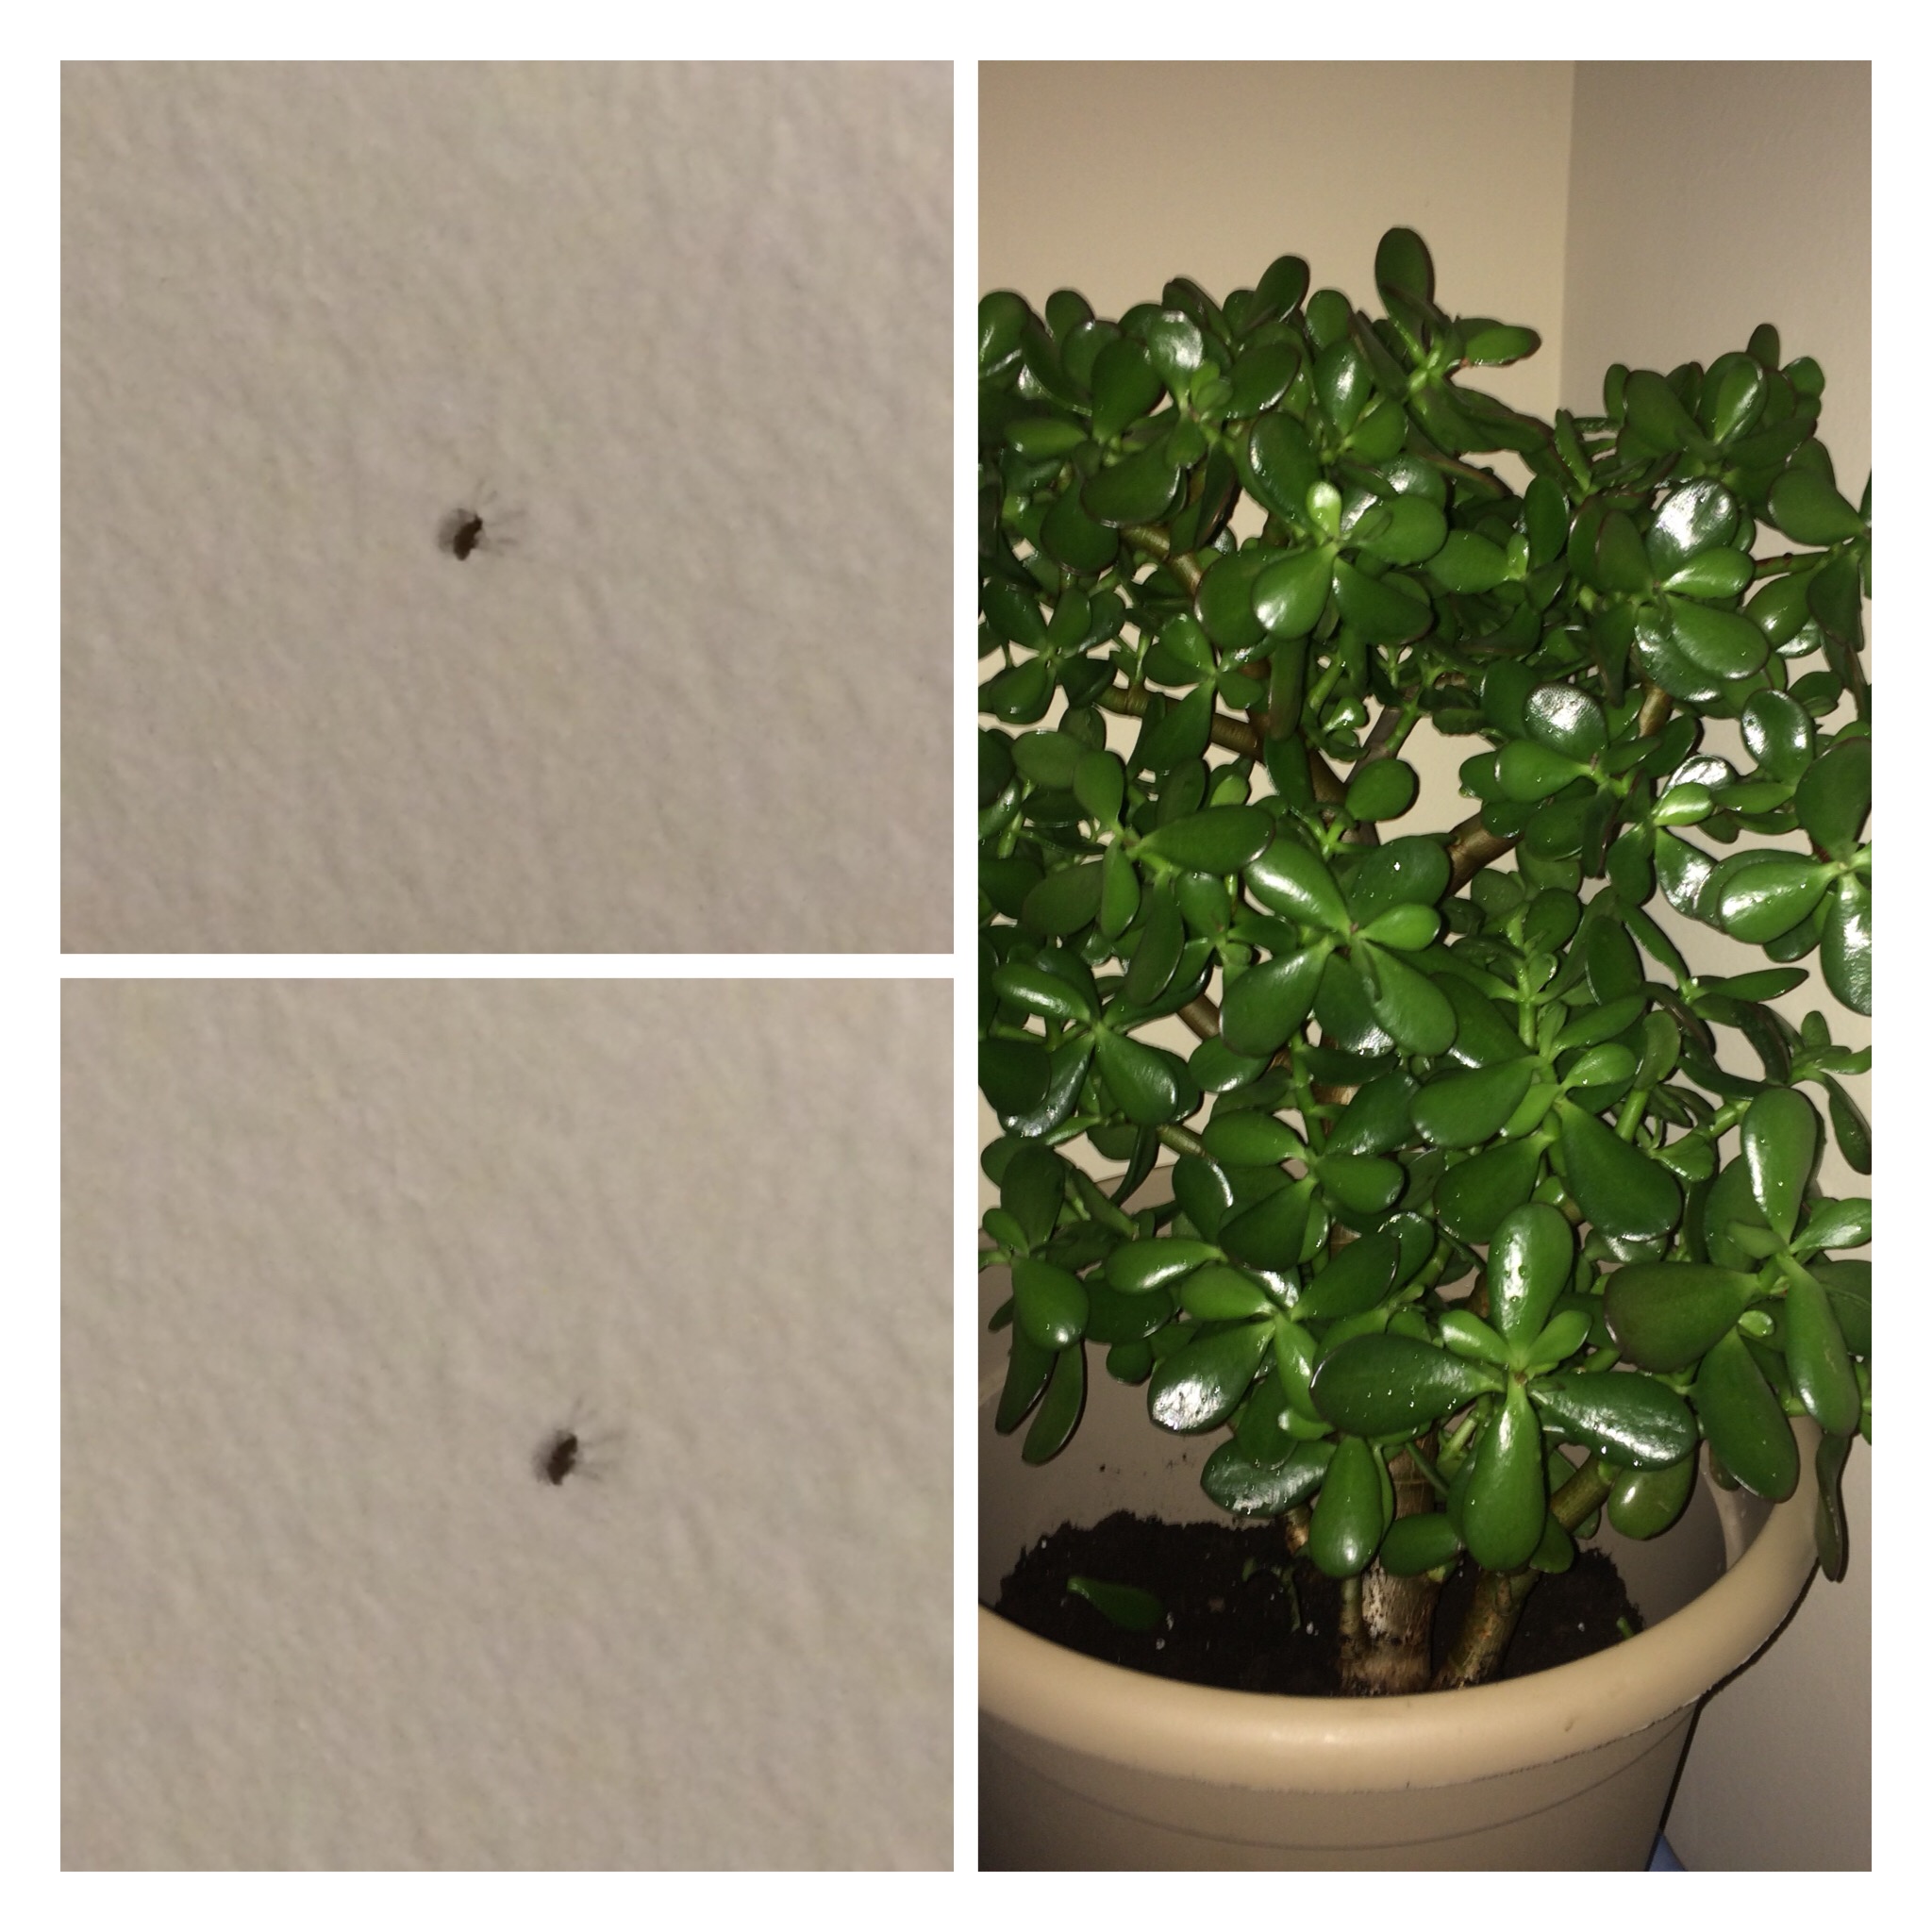 Tiny Black Bugs In Indoor Plant Soil